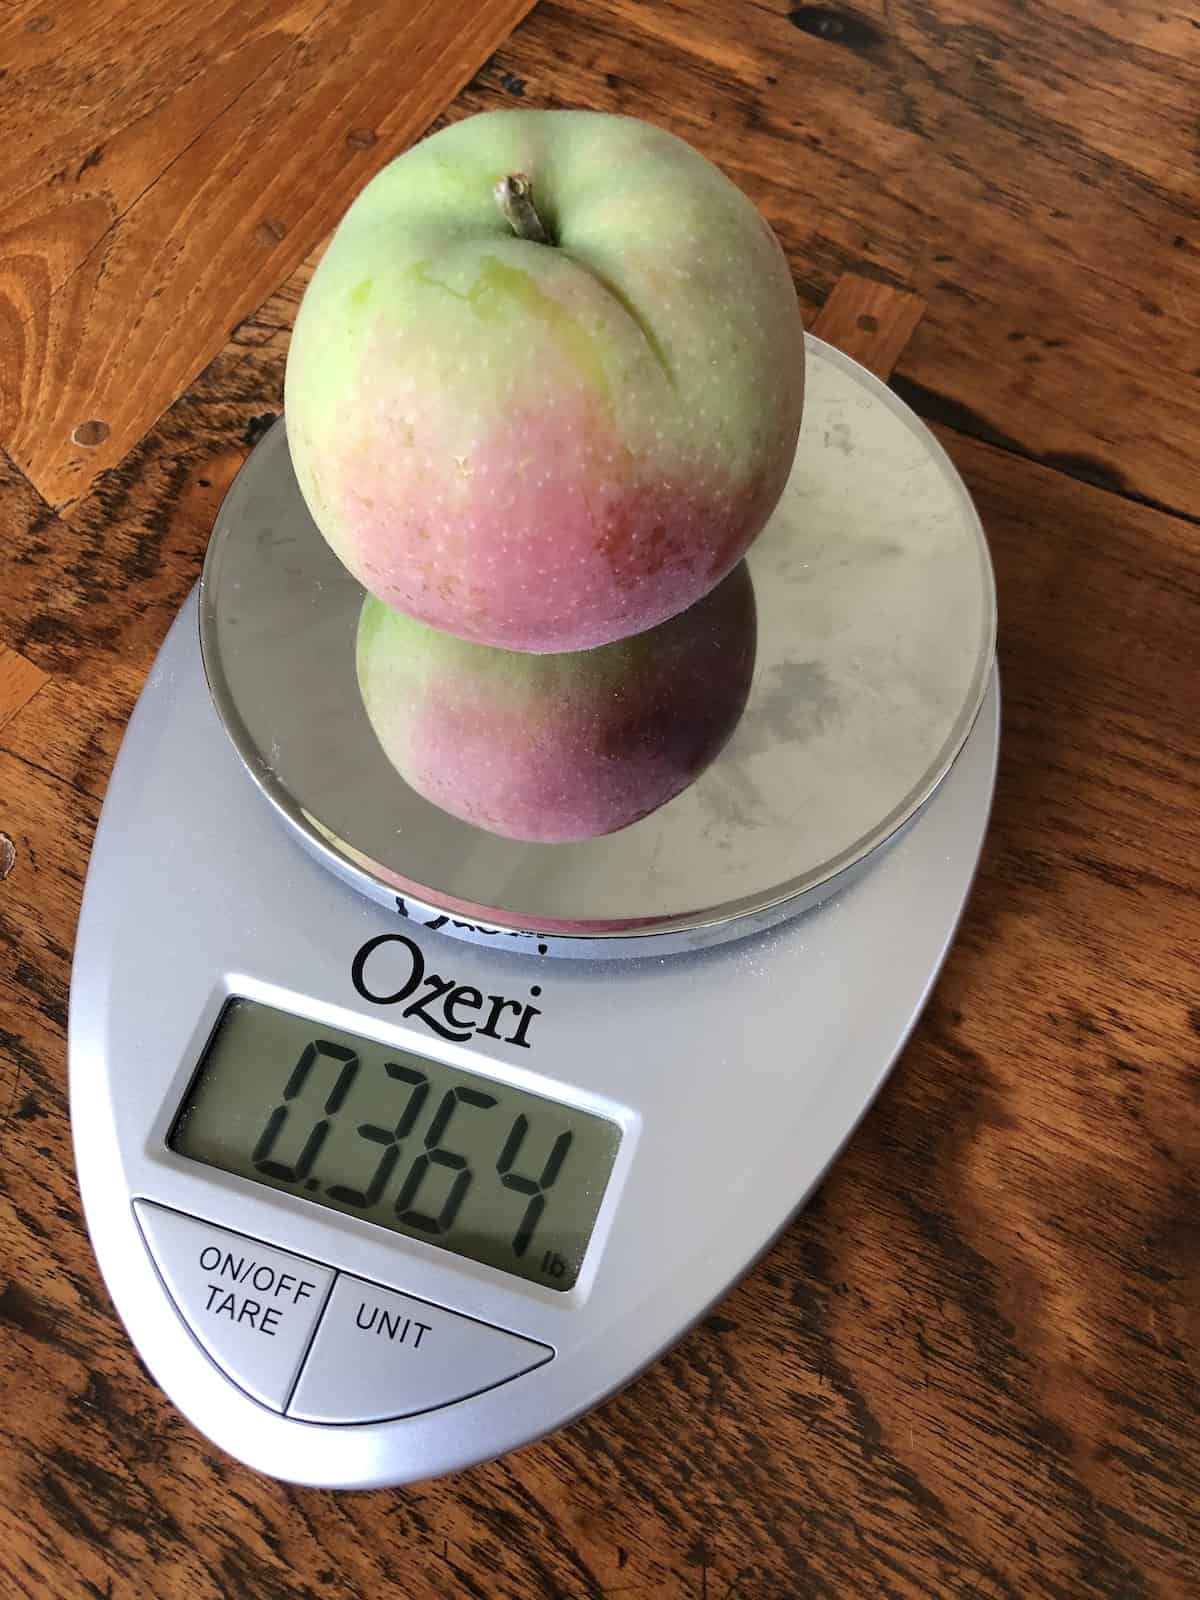 Green and red apple on kitchen scale